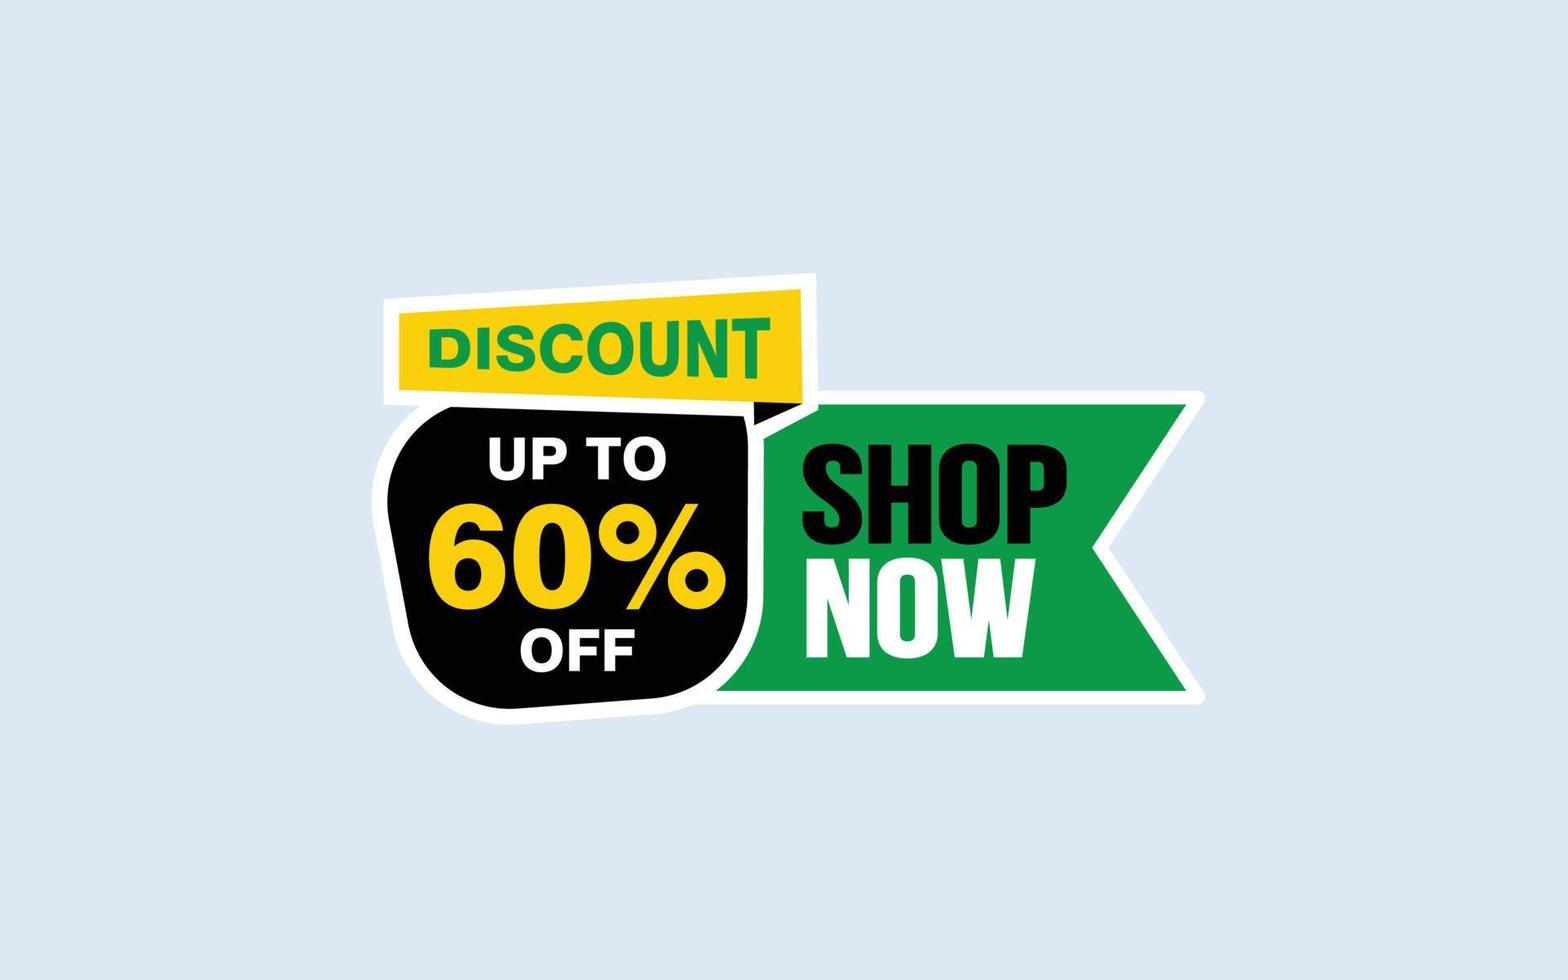 60 Percent SHOP NOW offer, clearance, promotion banner layout with sticker style. vector